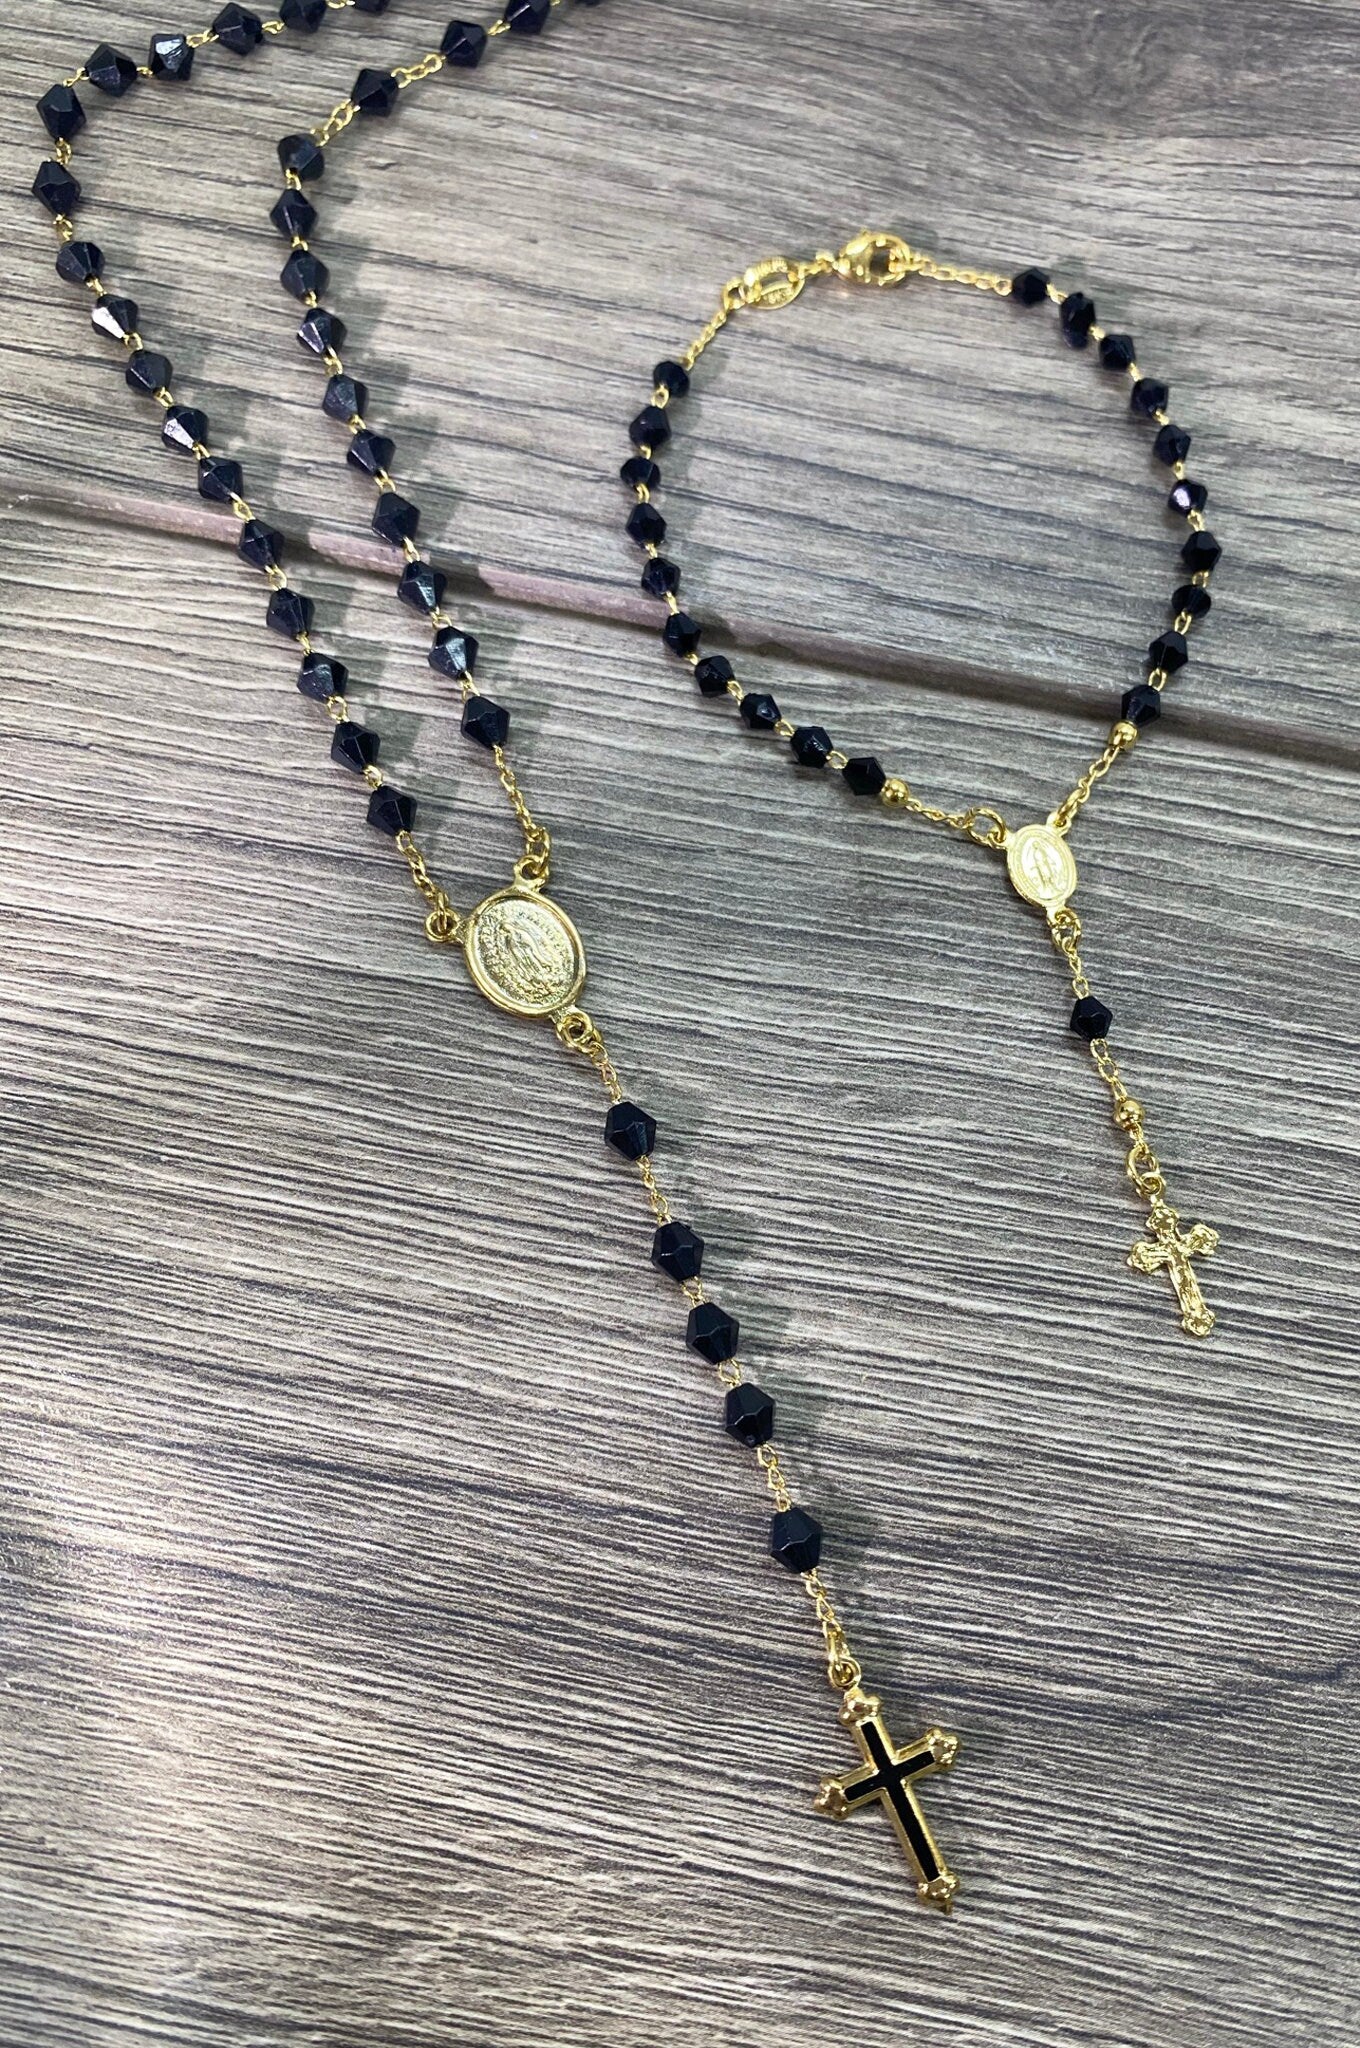 Fashion Rosary In 18k Gold Filled Featuring Black Beads Our Lady of Guadalupe (Virgen de Guadalupe) And Cross Wholesale Jewelry Supplies